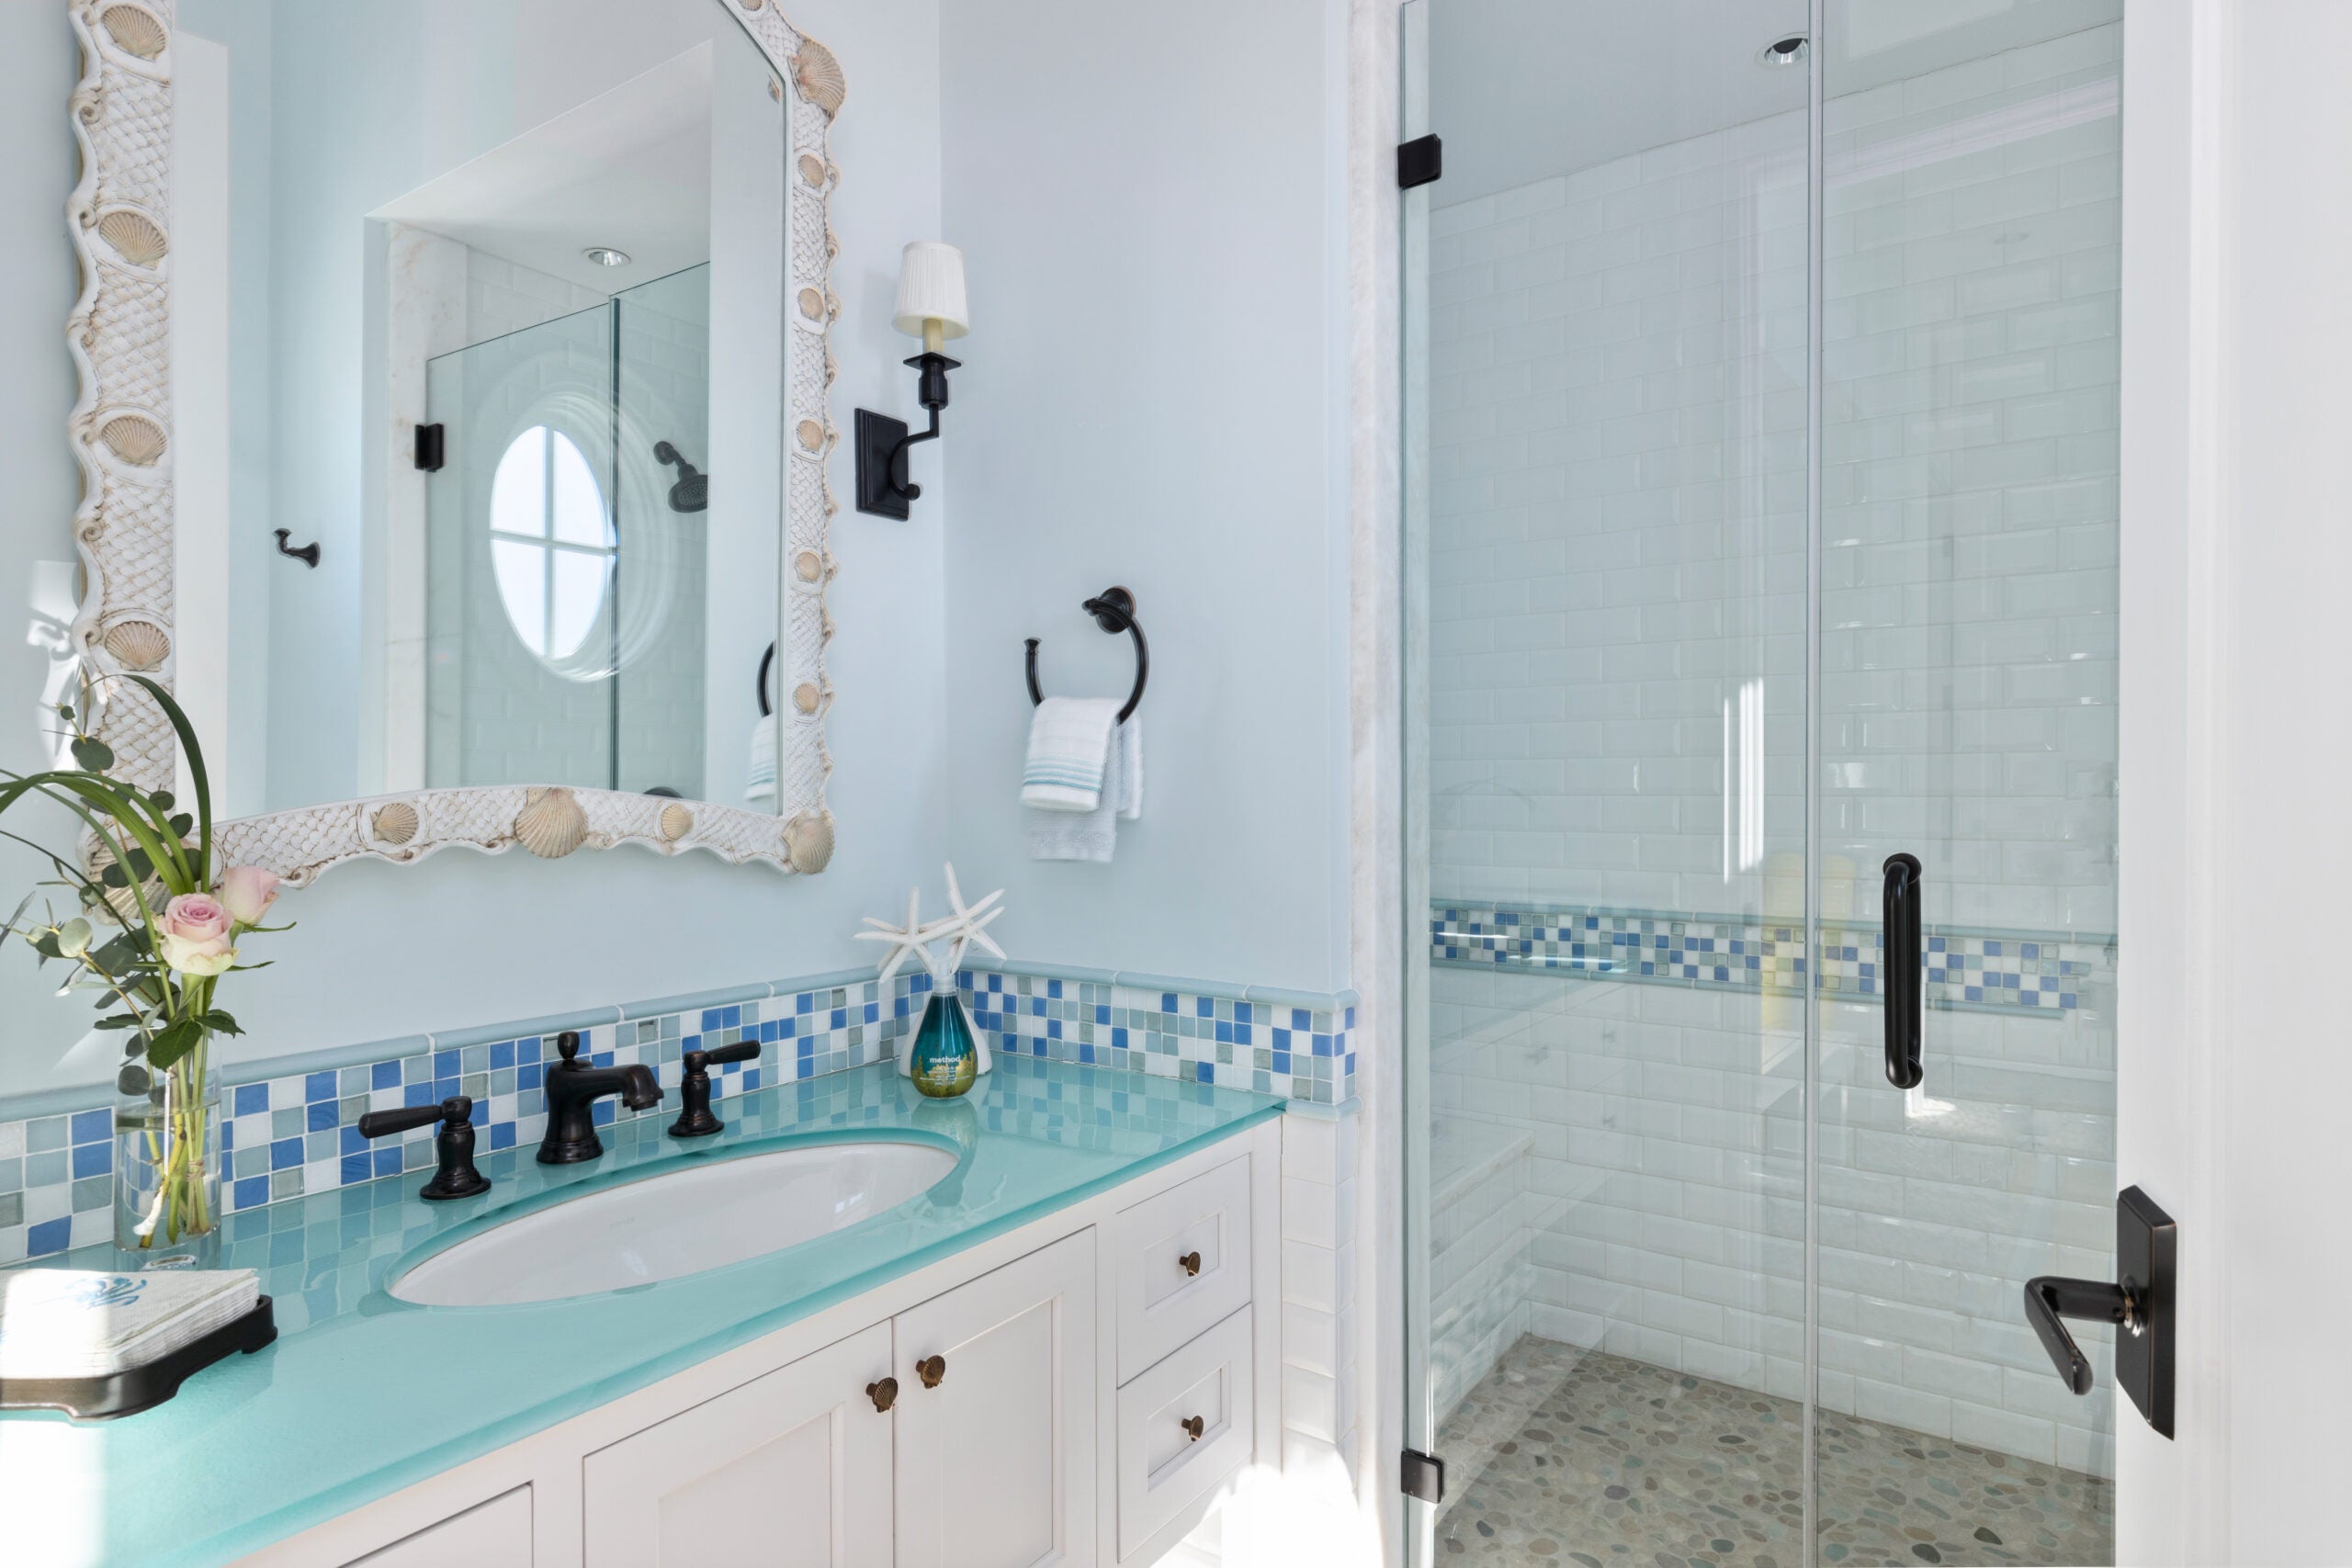 A bathroom with a green, white, and blue glass tile inlay that is mimicked in the shower. A seashell mirror hangs over a sink with an aqua glass top. The cabinetry is white. The shower has a pebblestone floor.